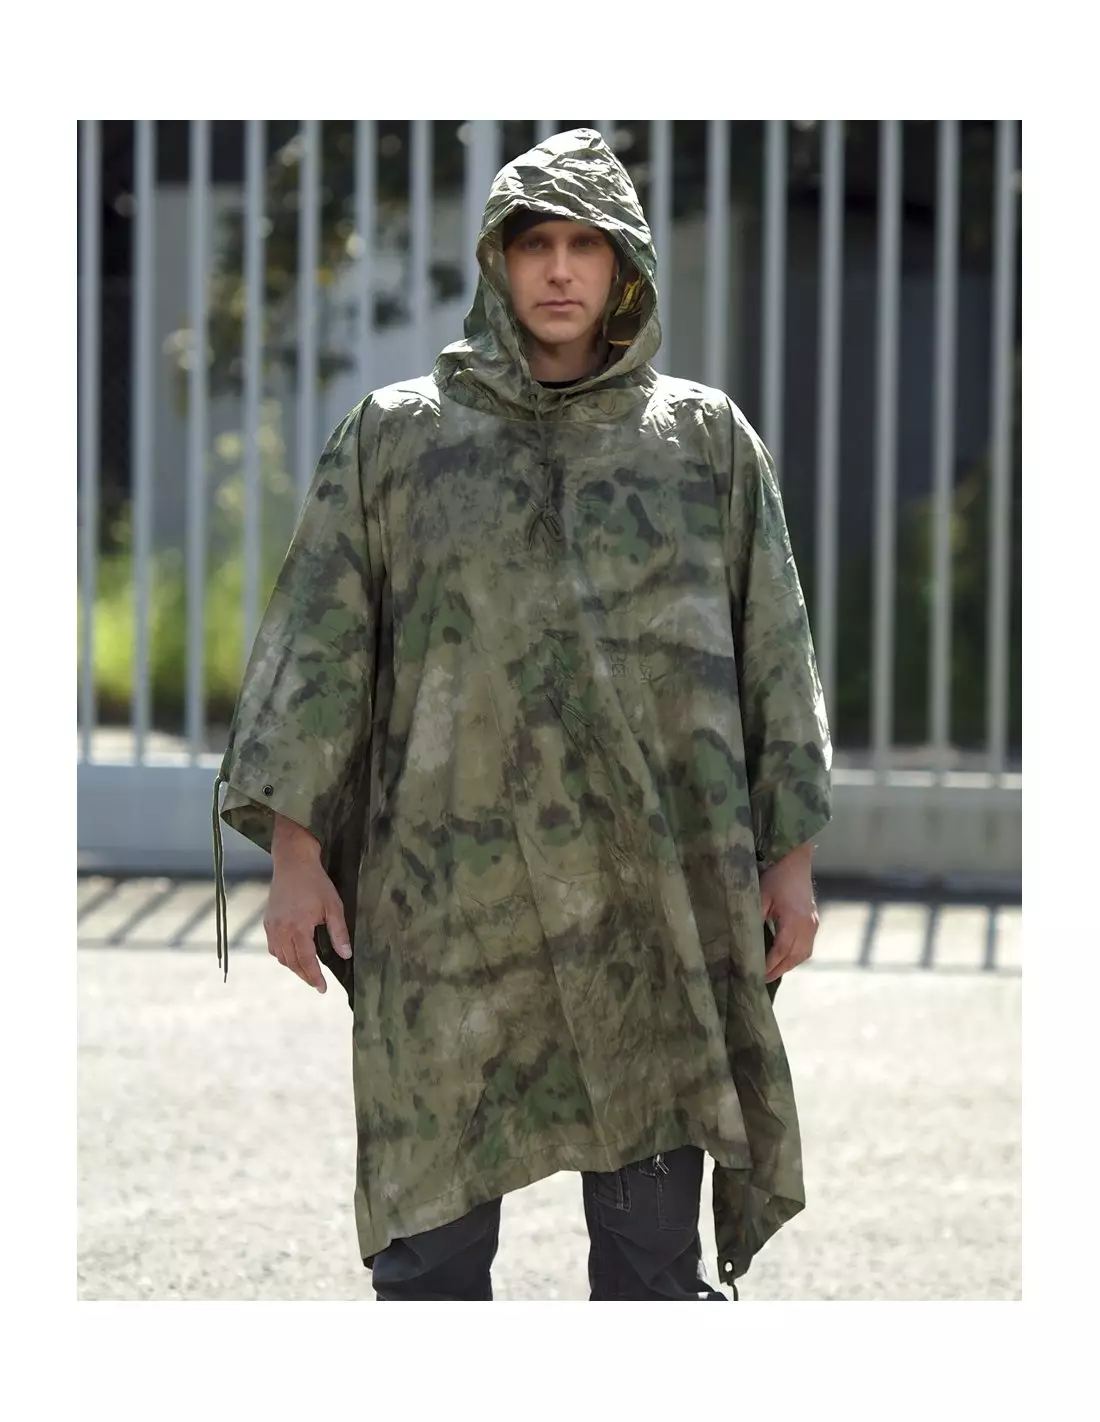 Poncho Impermeable Rip-Stop MILTEC WASP I Z1B